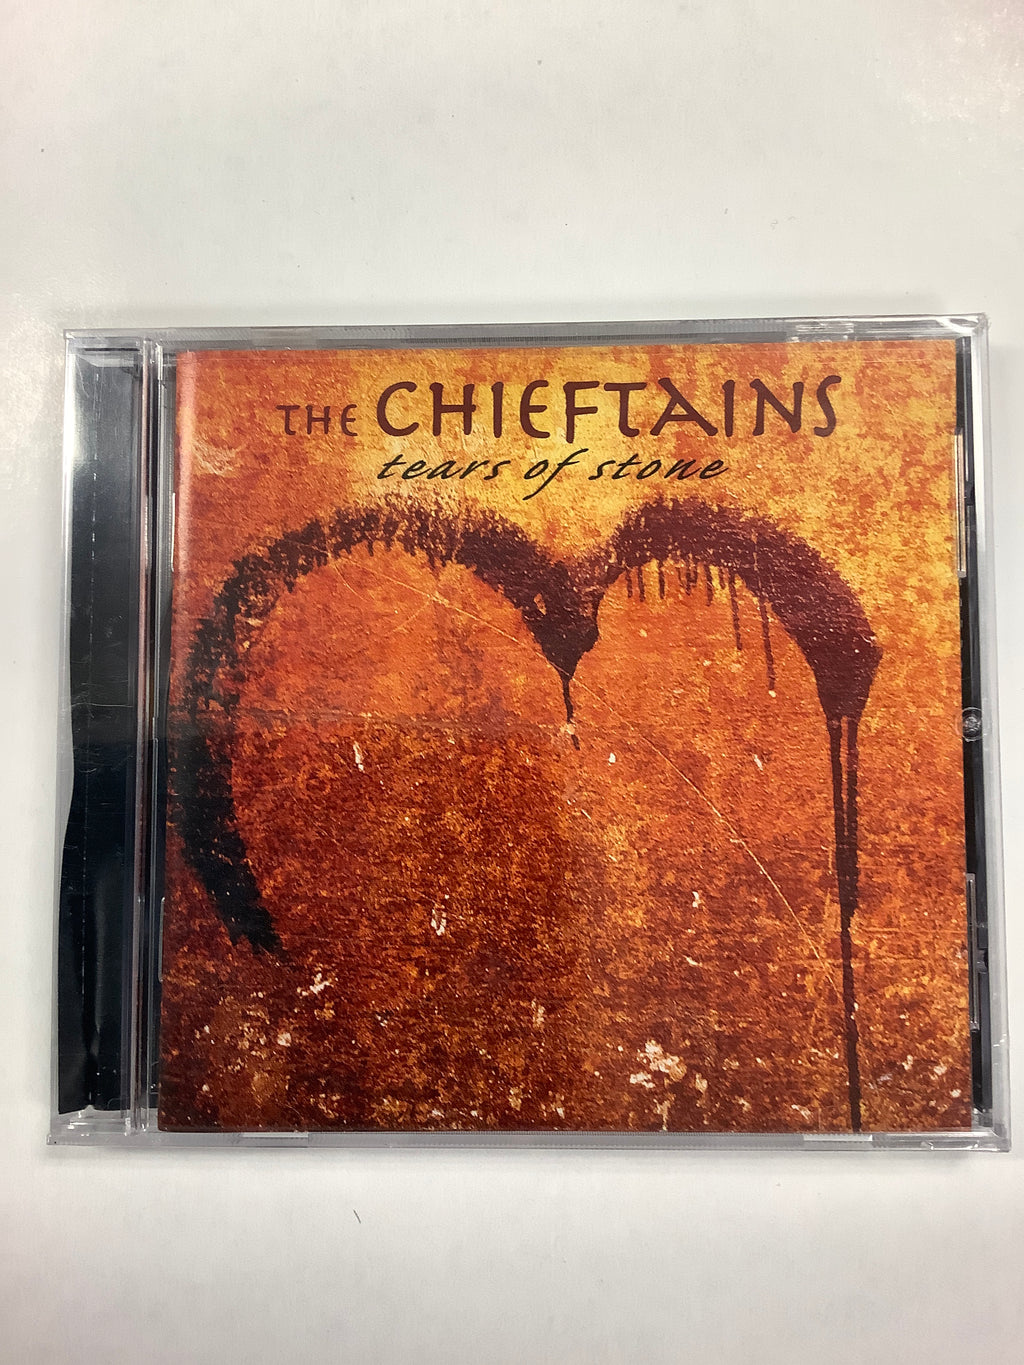 The chieftains tears of stone cd